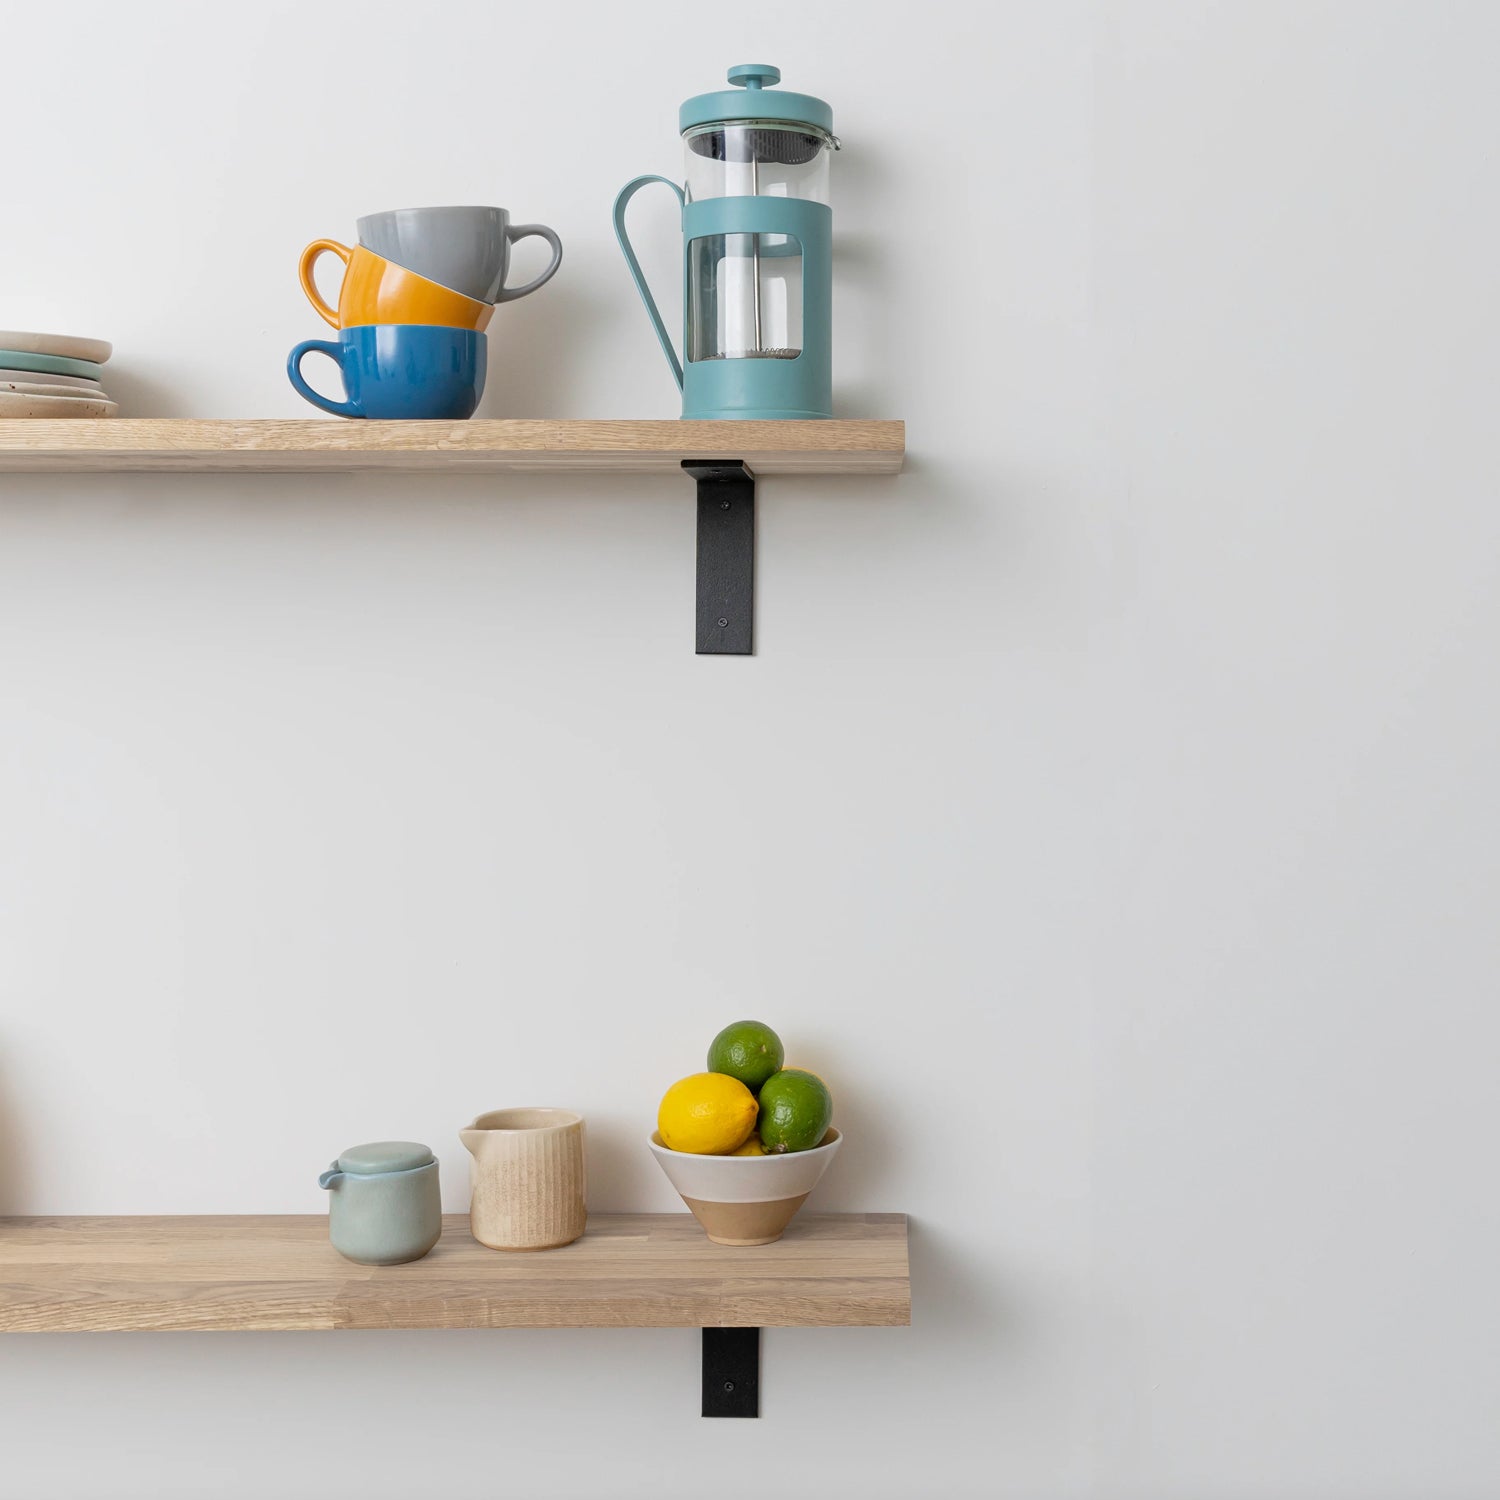 Solid Wood Oak Shelves 18mm (Sanded) with Powder-Coated Cast Iron Brackets